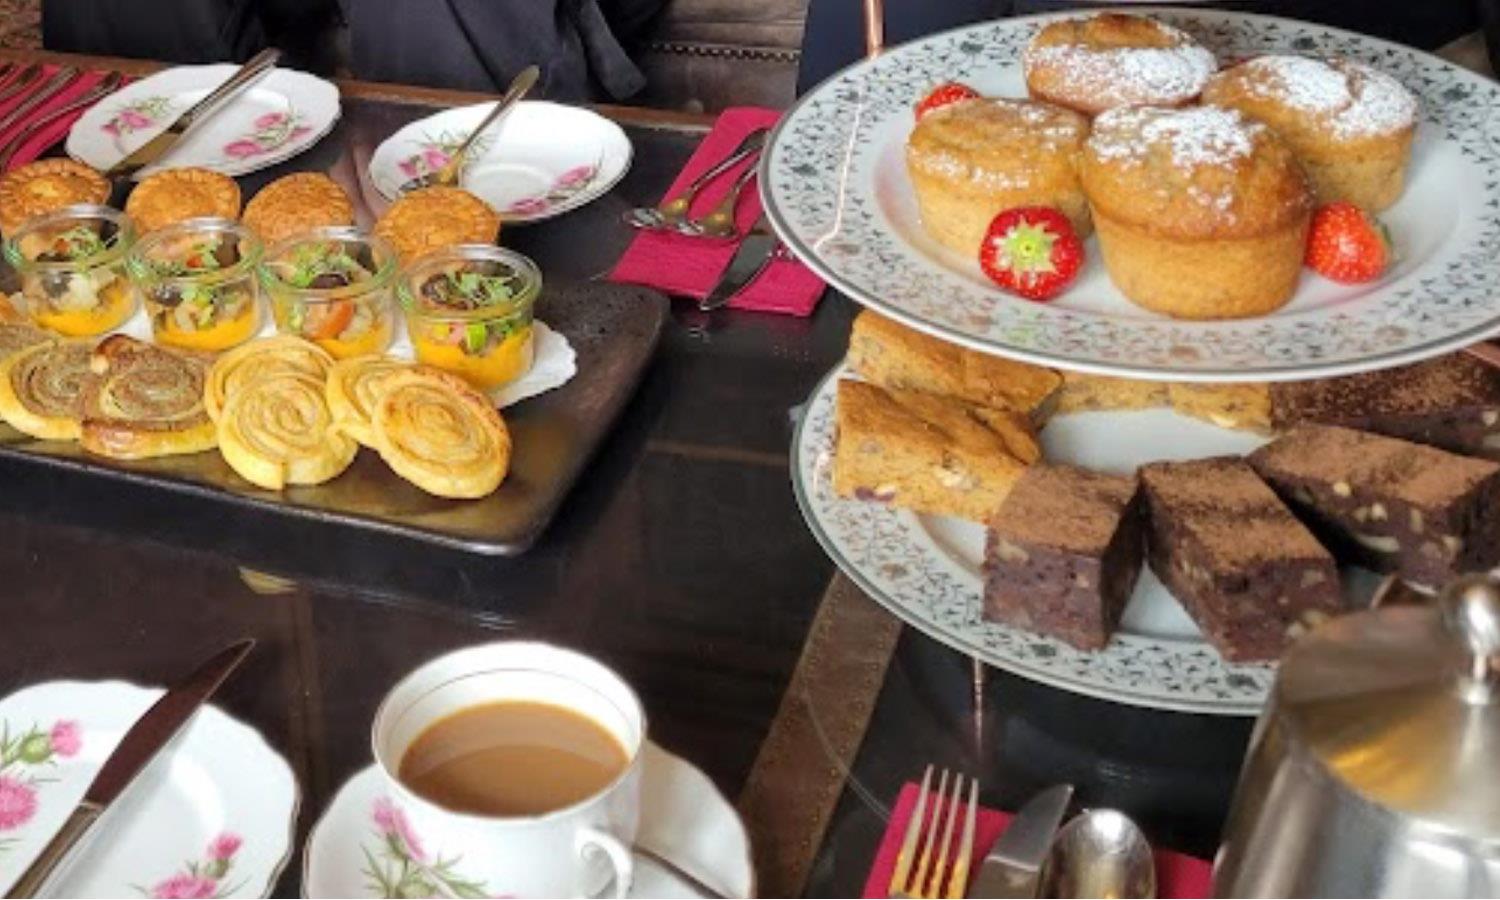 Afternoon tea with savoury and sweet treats